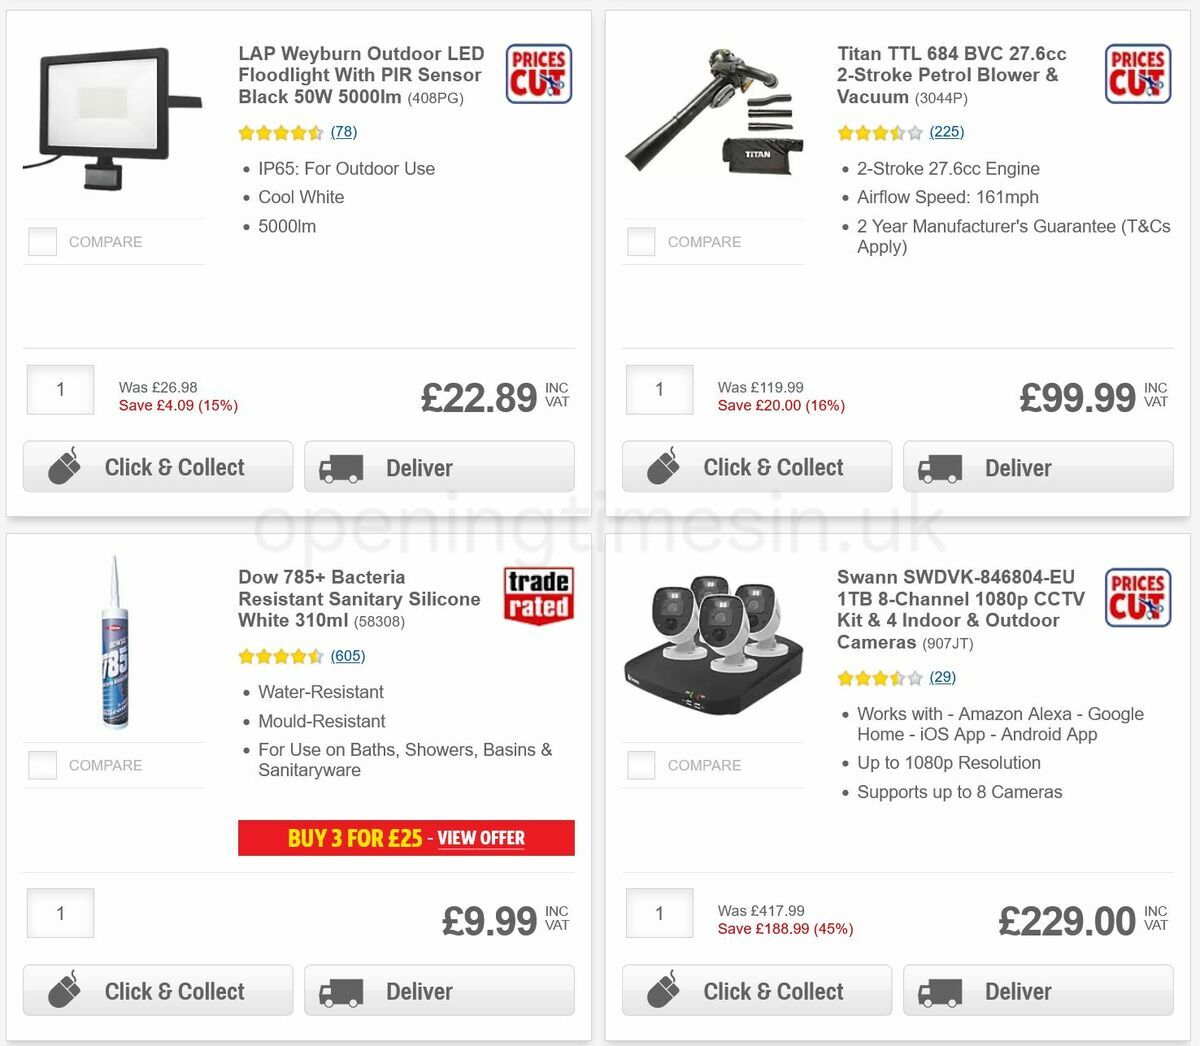 Screwfix Offers from 20 September